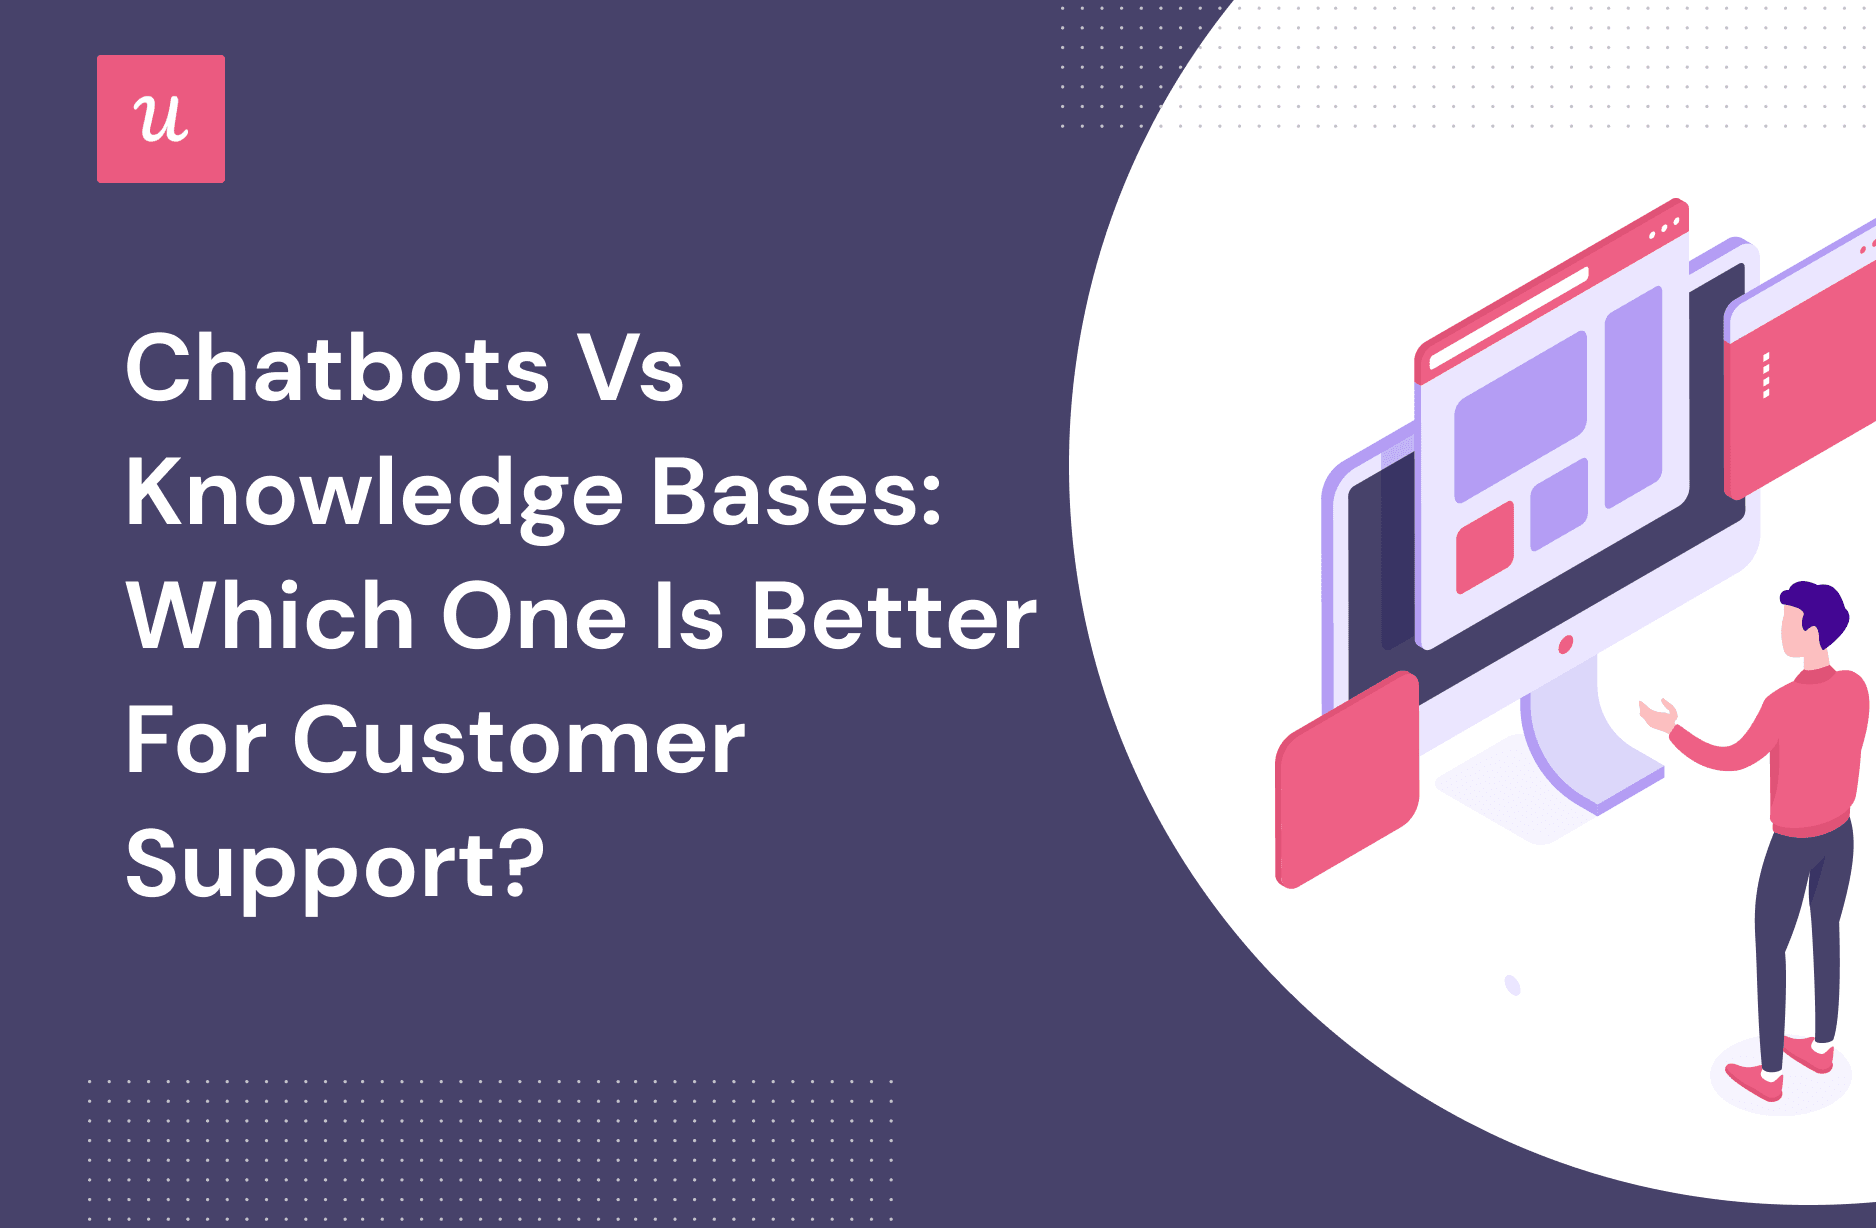 Chatbots vs Knowledge Bases: Which One Is Better for Customer Support?